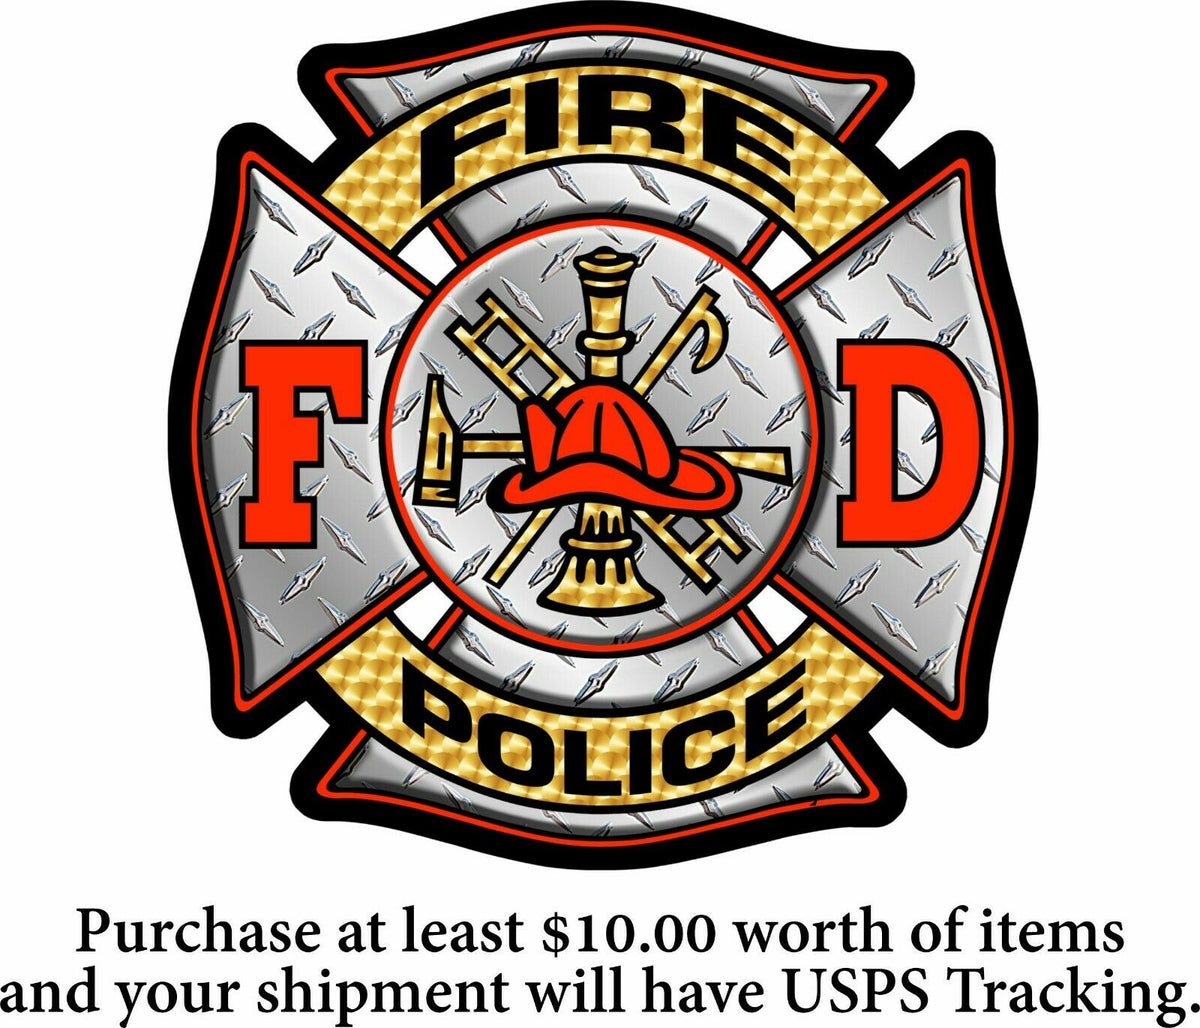 Fire Police Firefighter Decal Sticker - "FIRE POLICE" Maltese Cross Window Decal - Powercall Sirens LLC